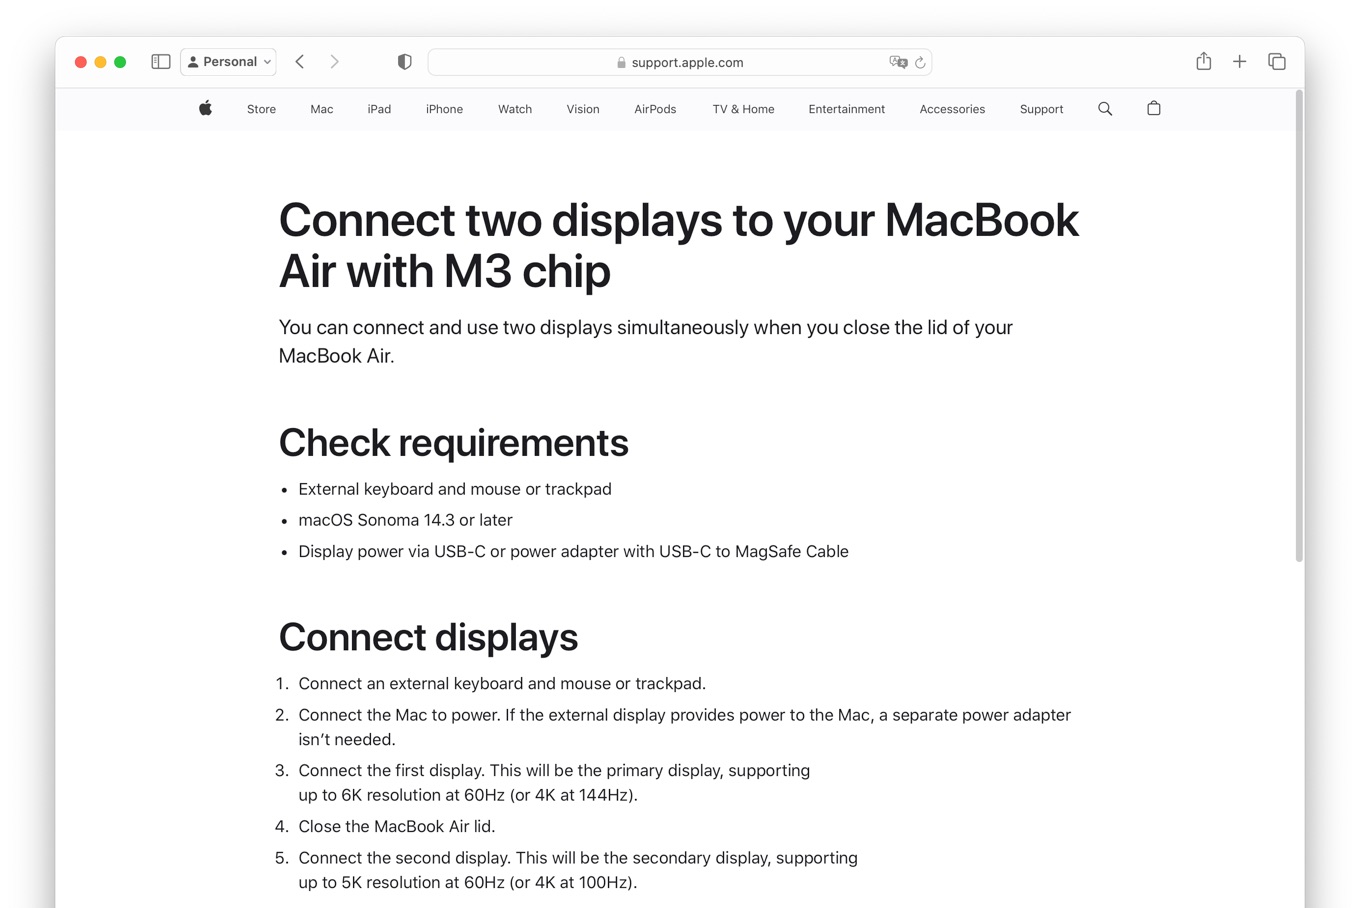 Connect two displays to your MacBook Air with M3 chip